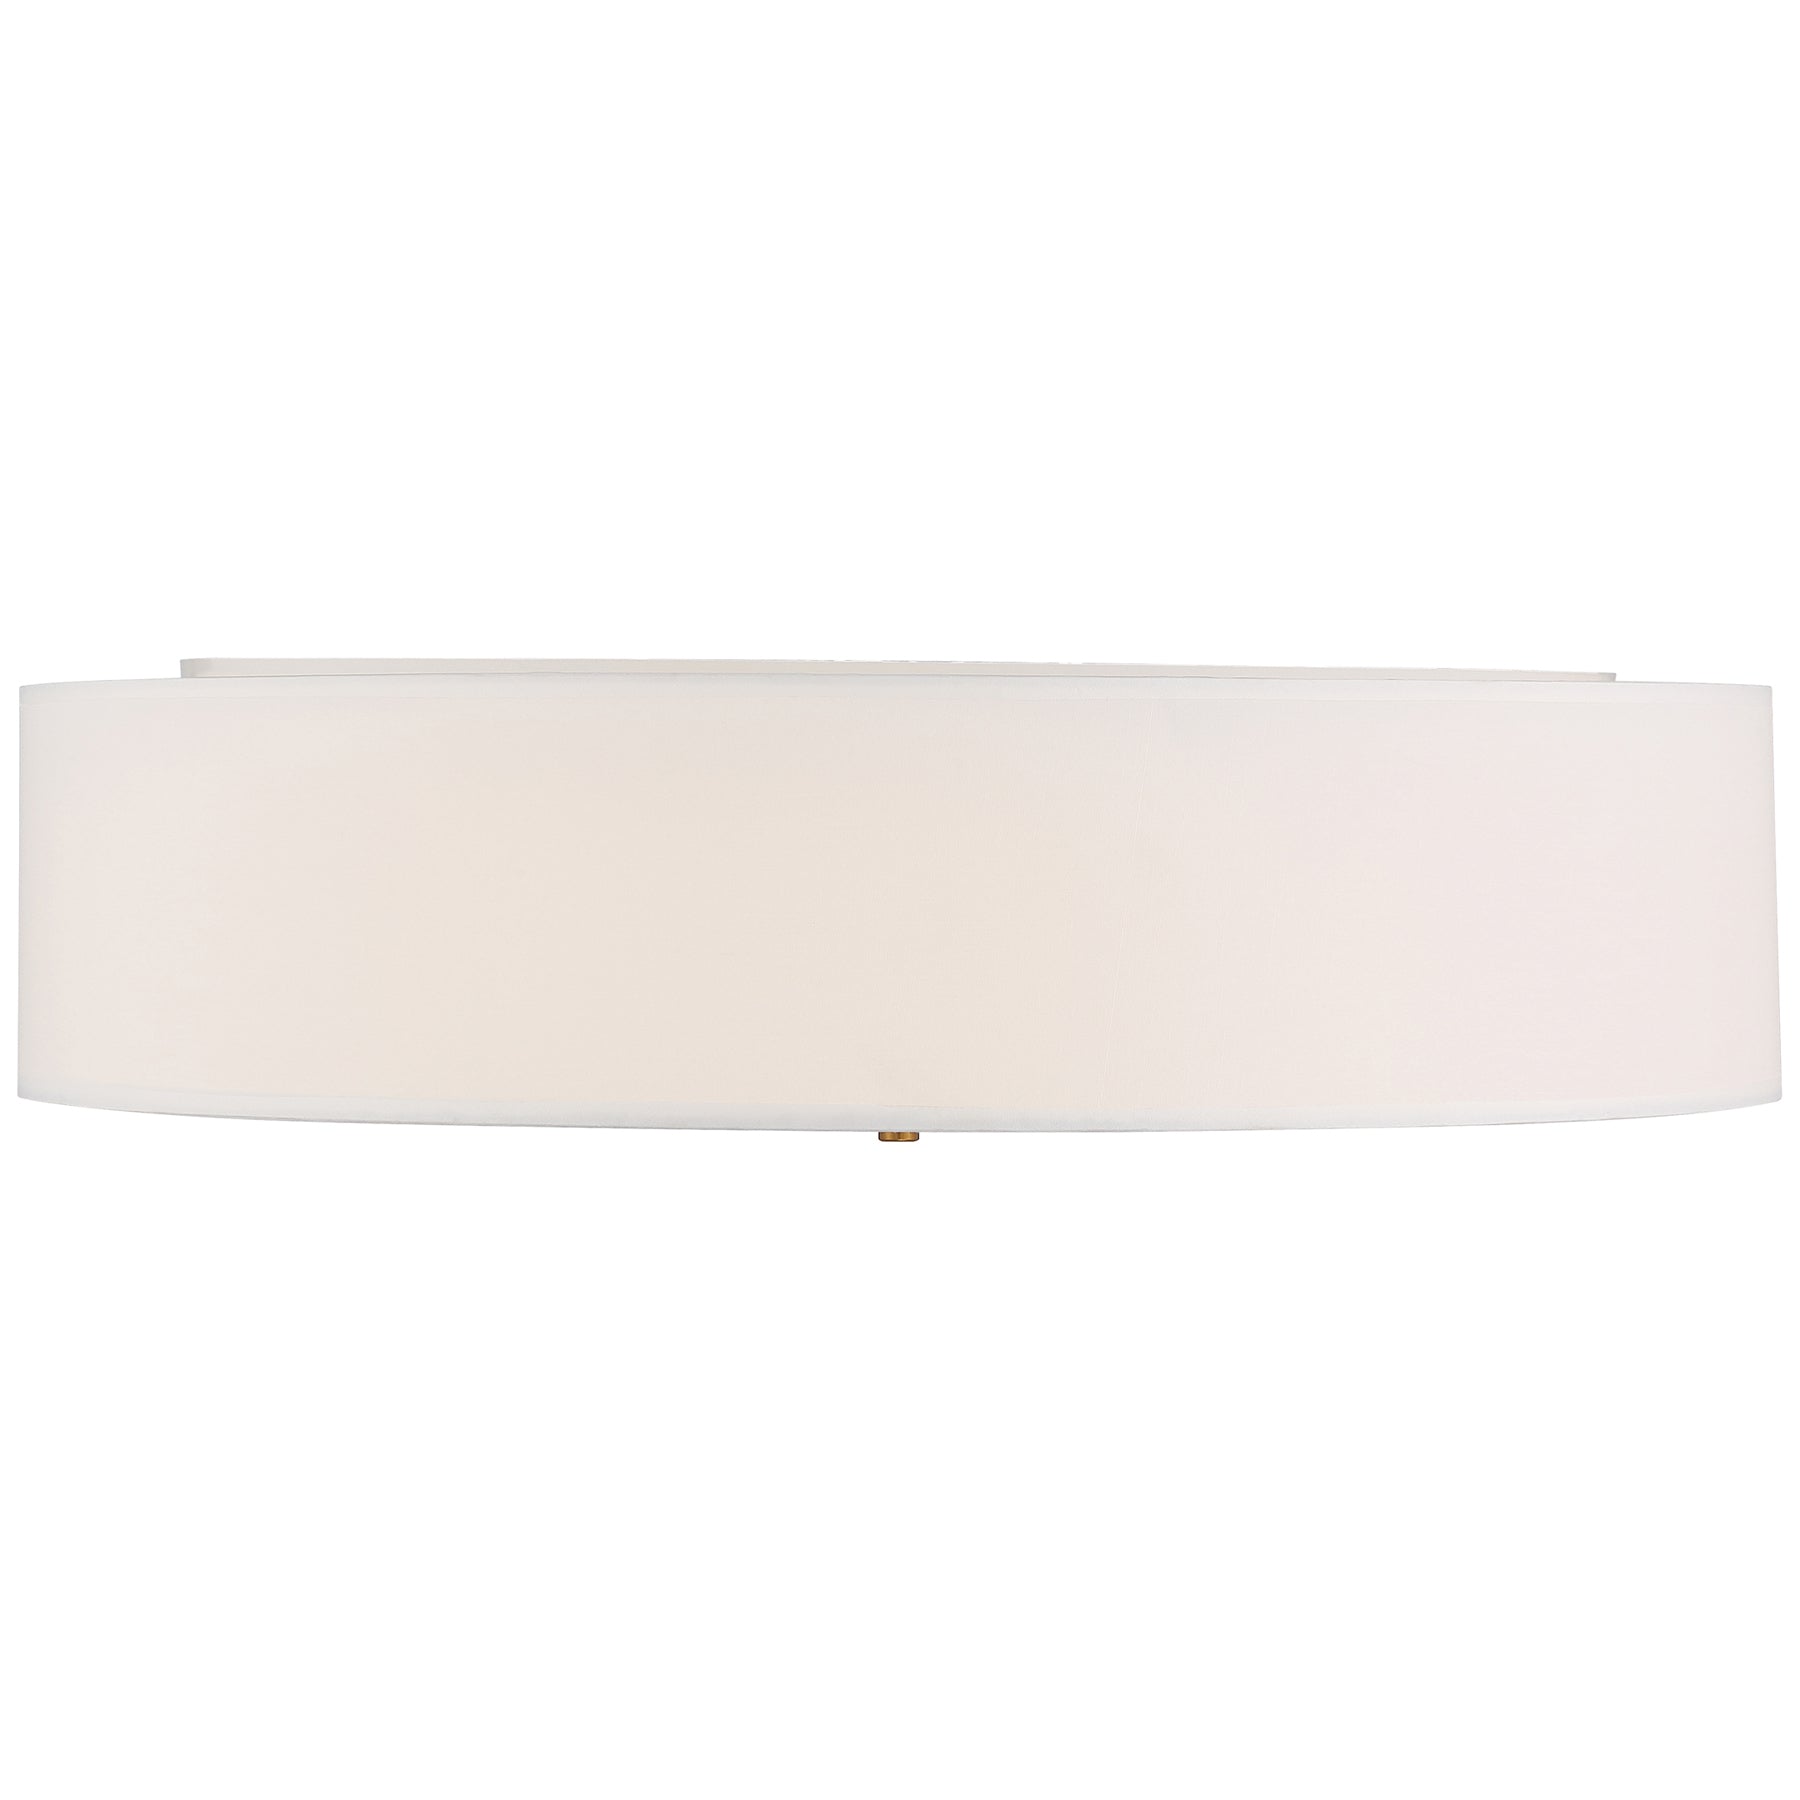 Mid Town 4 Light 24in. Flush Mount - Antique Brushed Brass